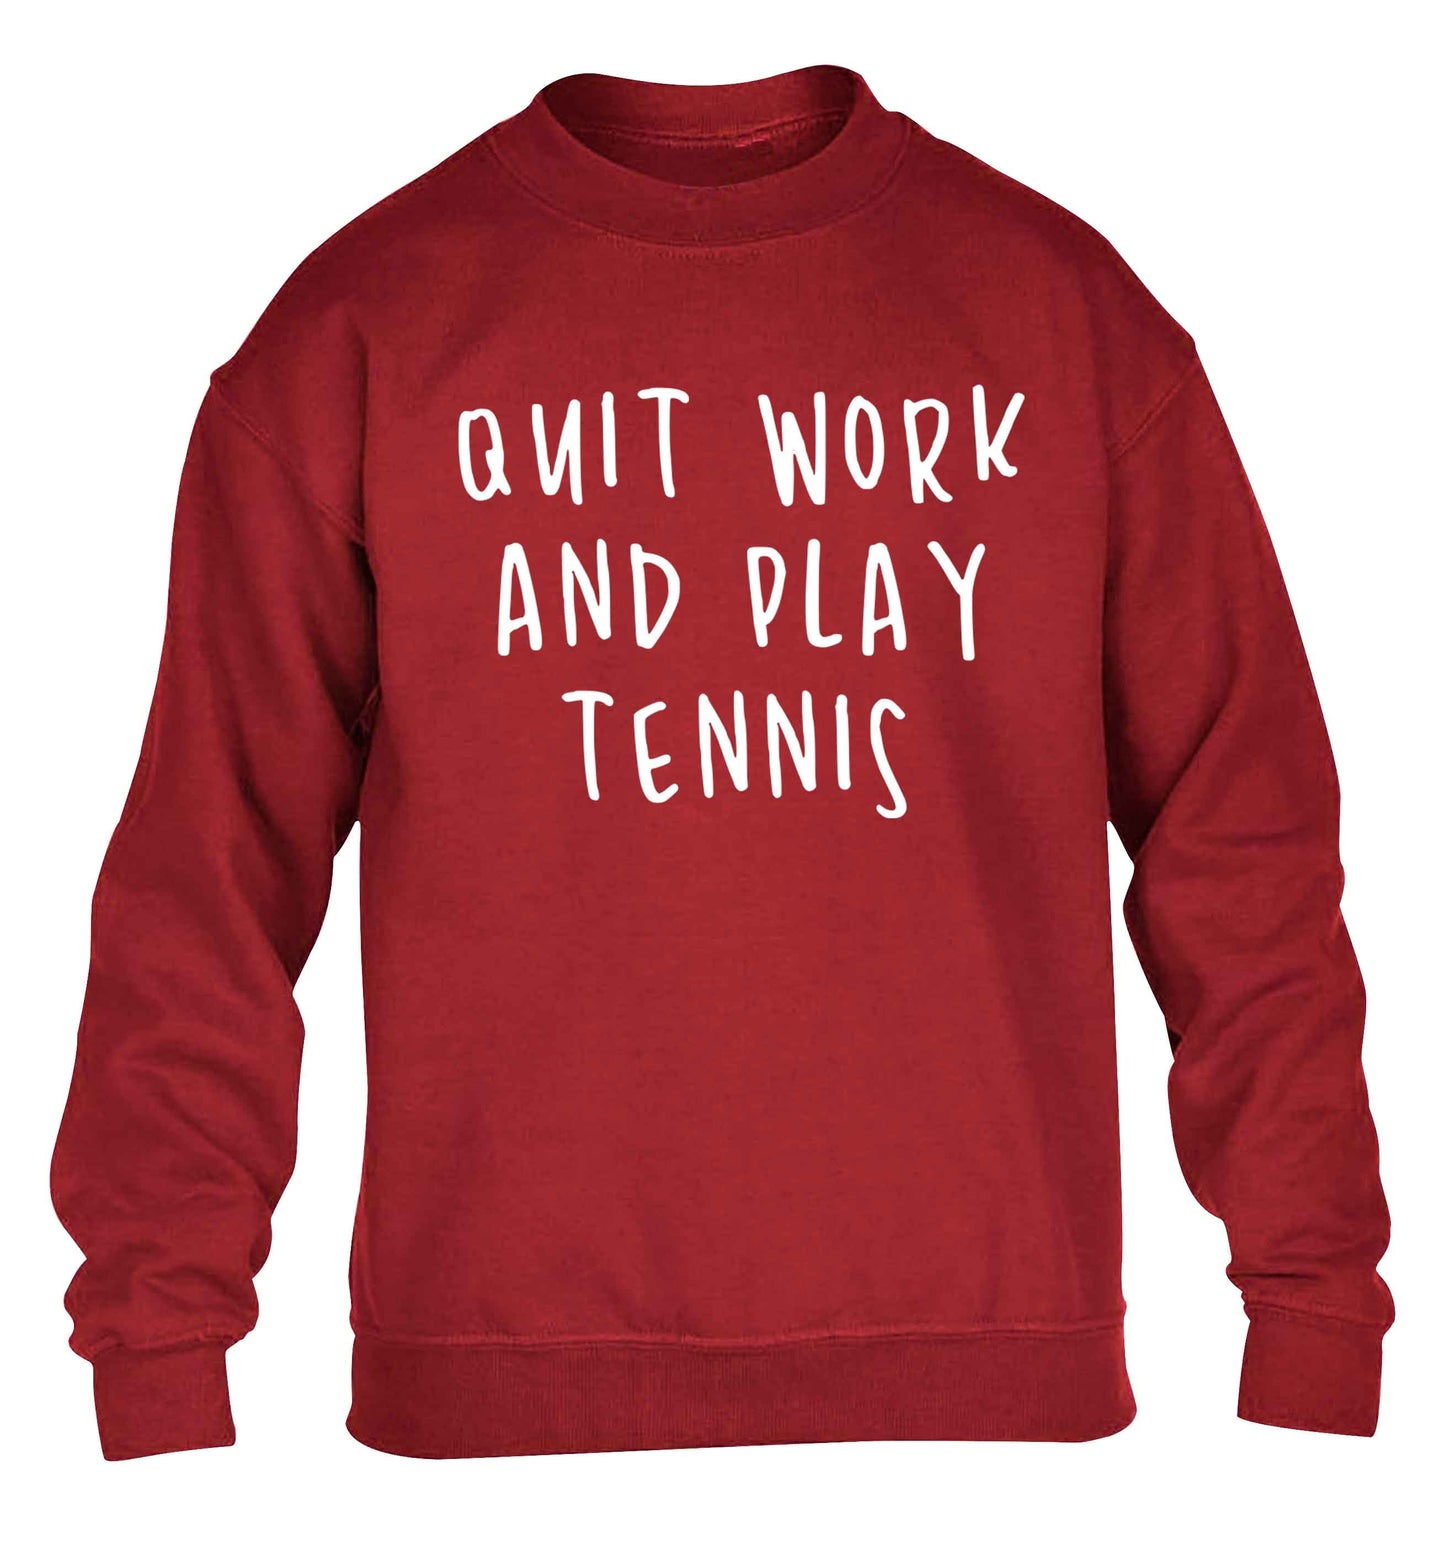 Quit work and play tennis children's grey sweater 12-13 Years